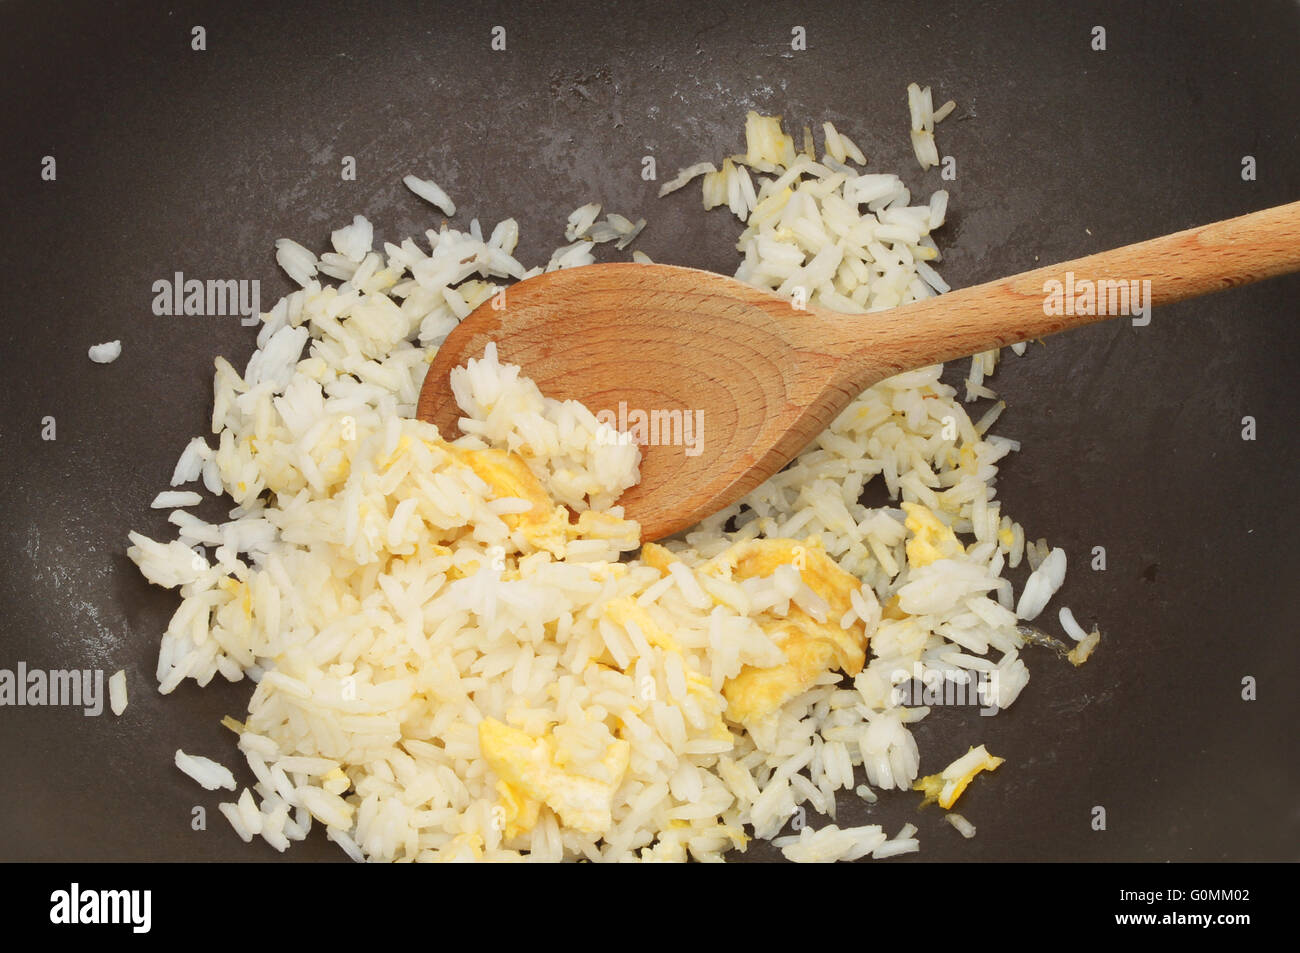 Closeup of egg fried rice in a wok with a wooden spoon Stock Photo